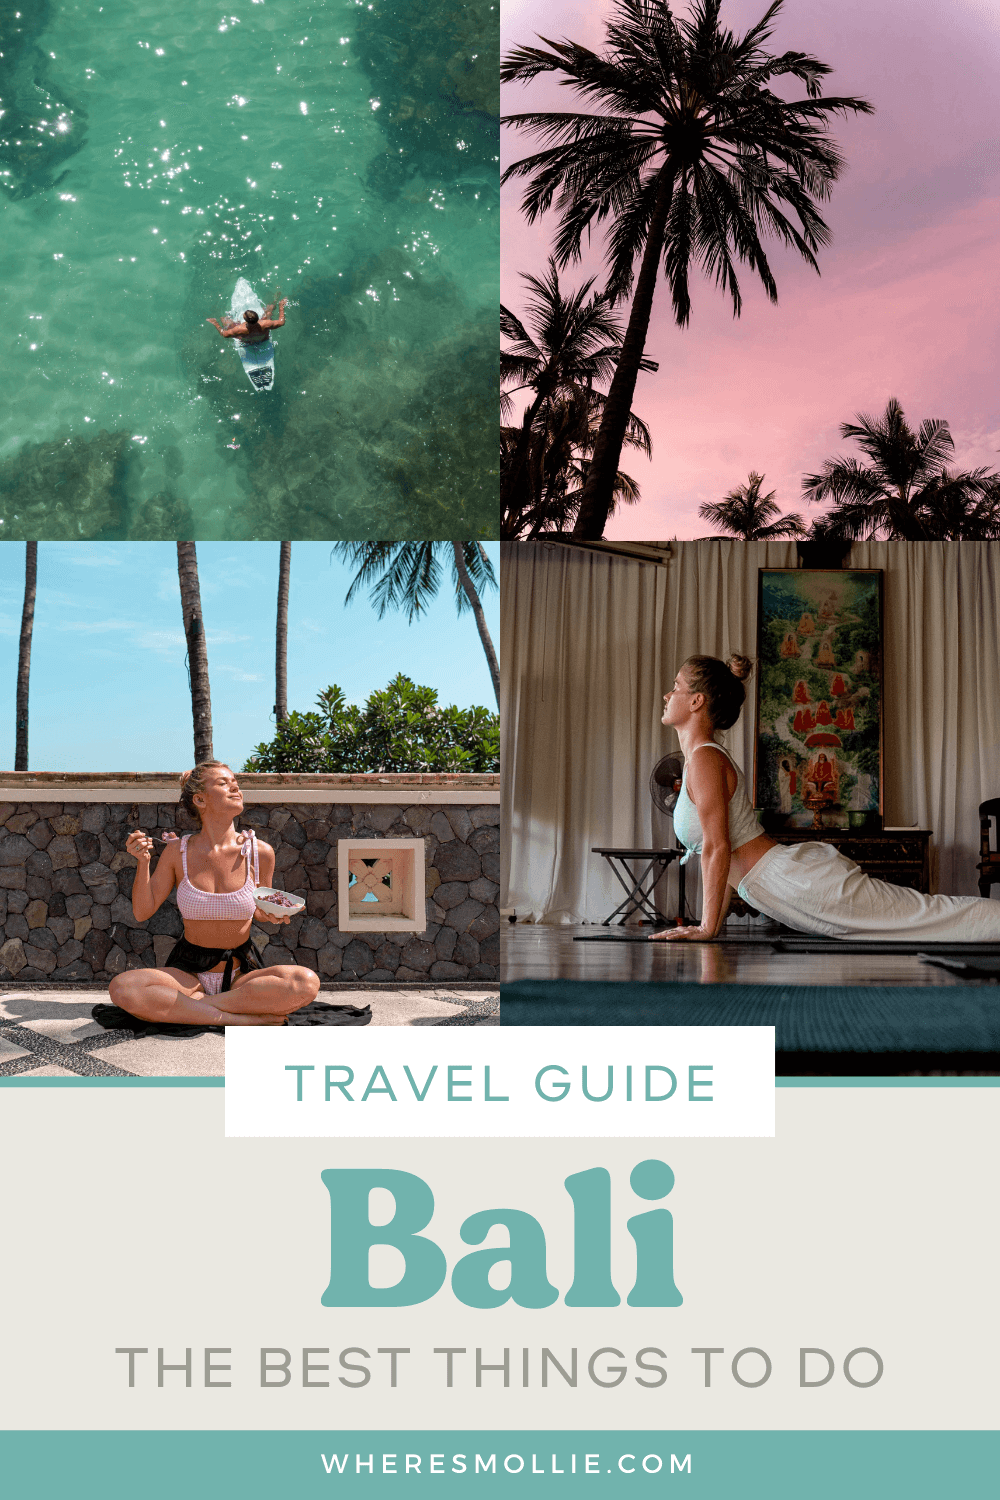 The best things to do in Bali